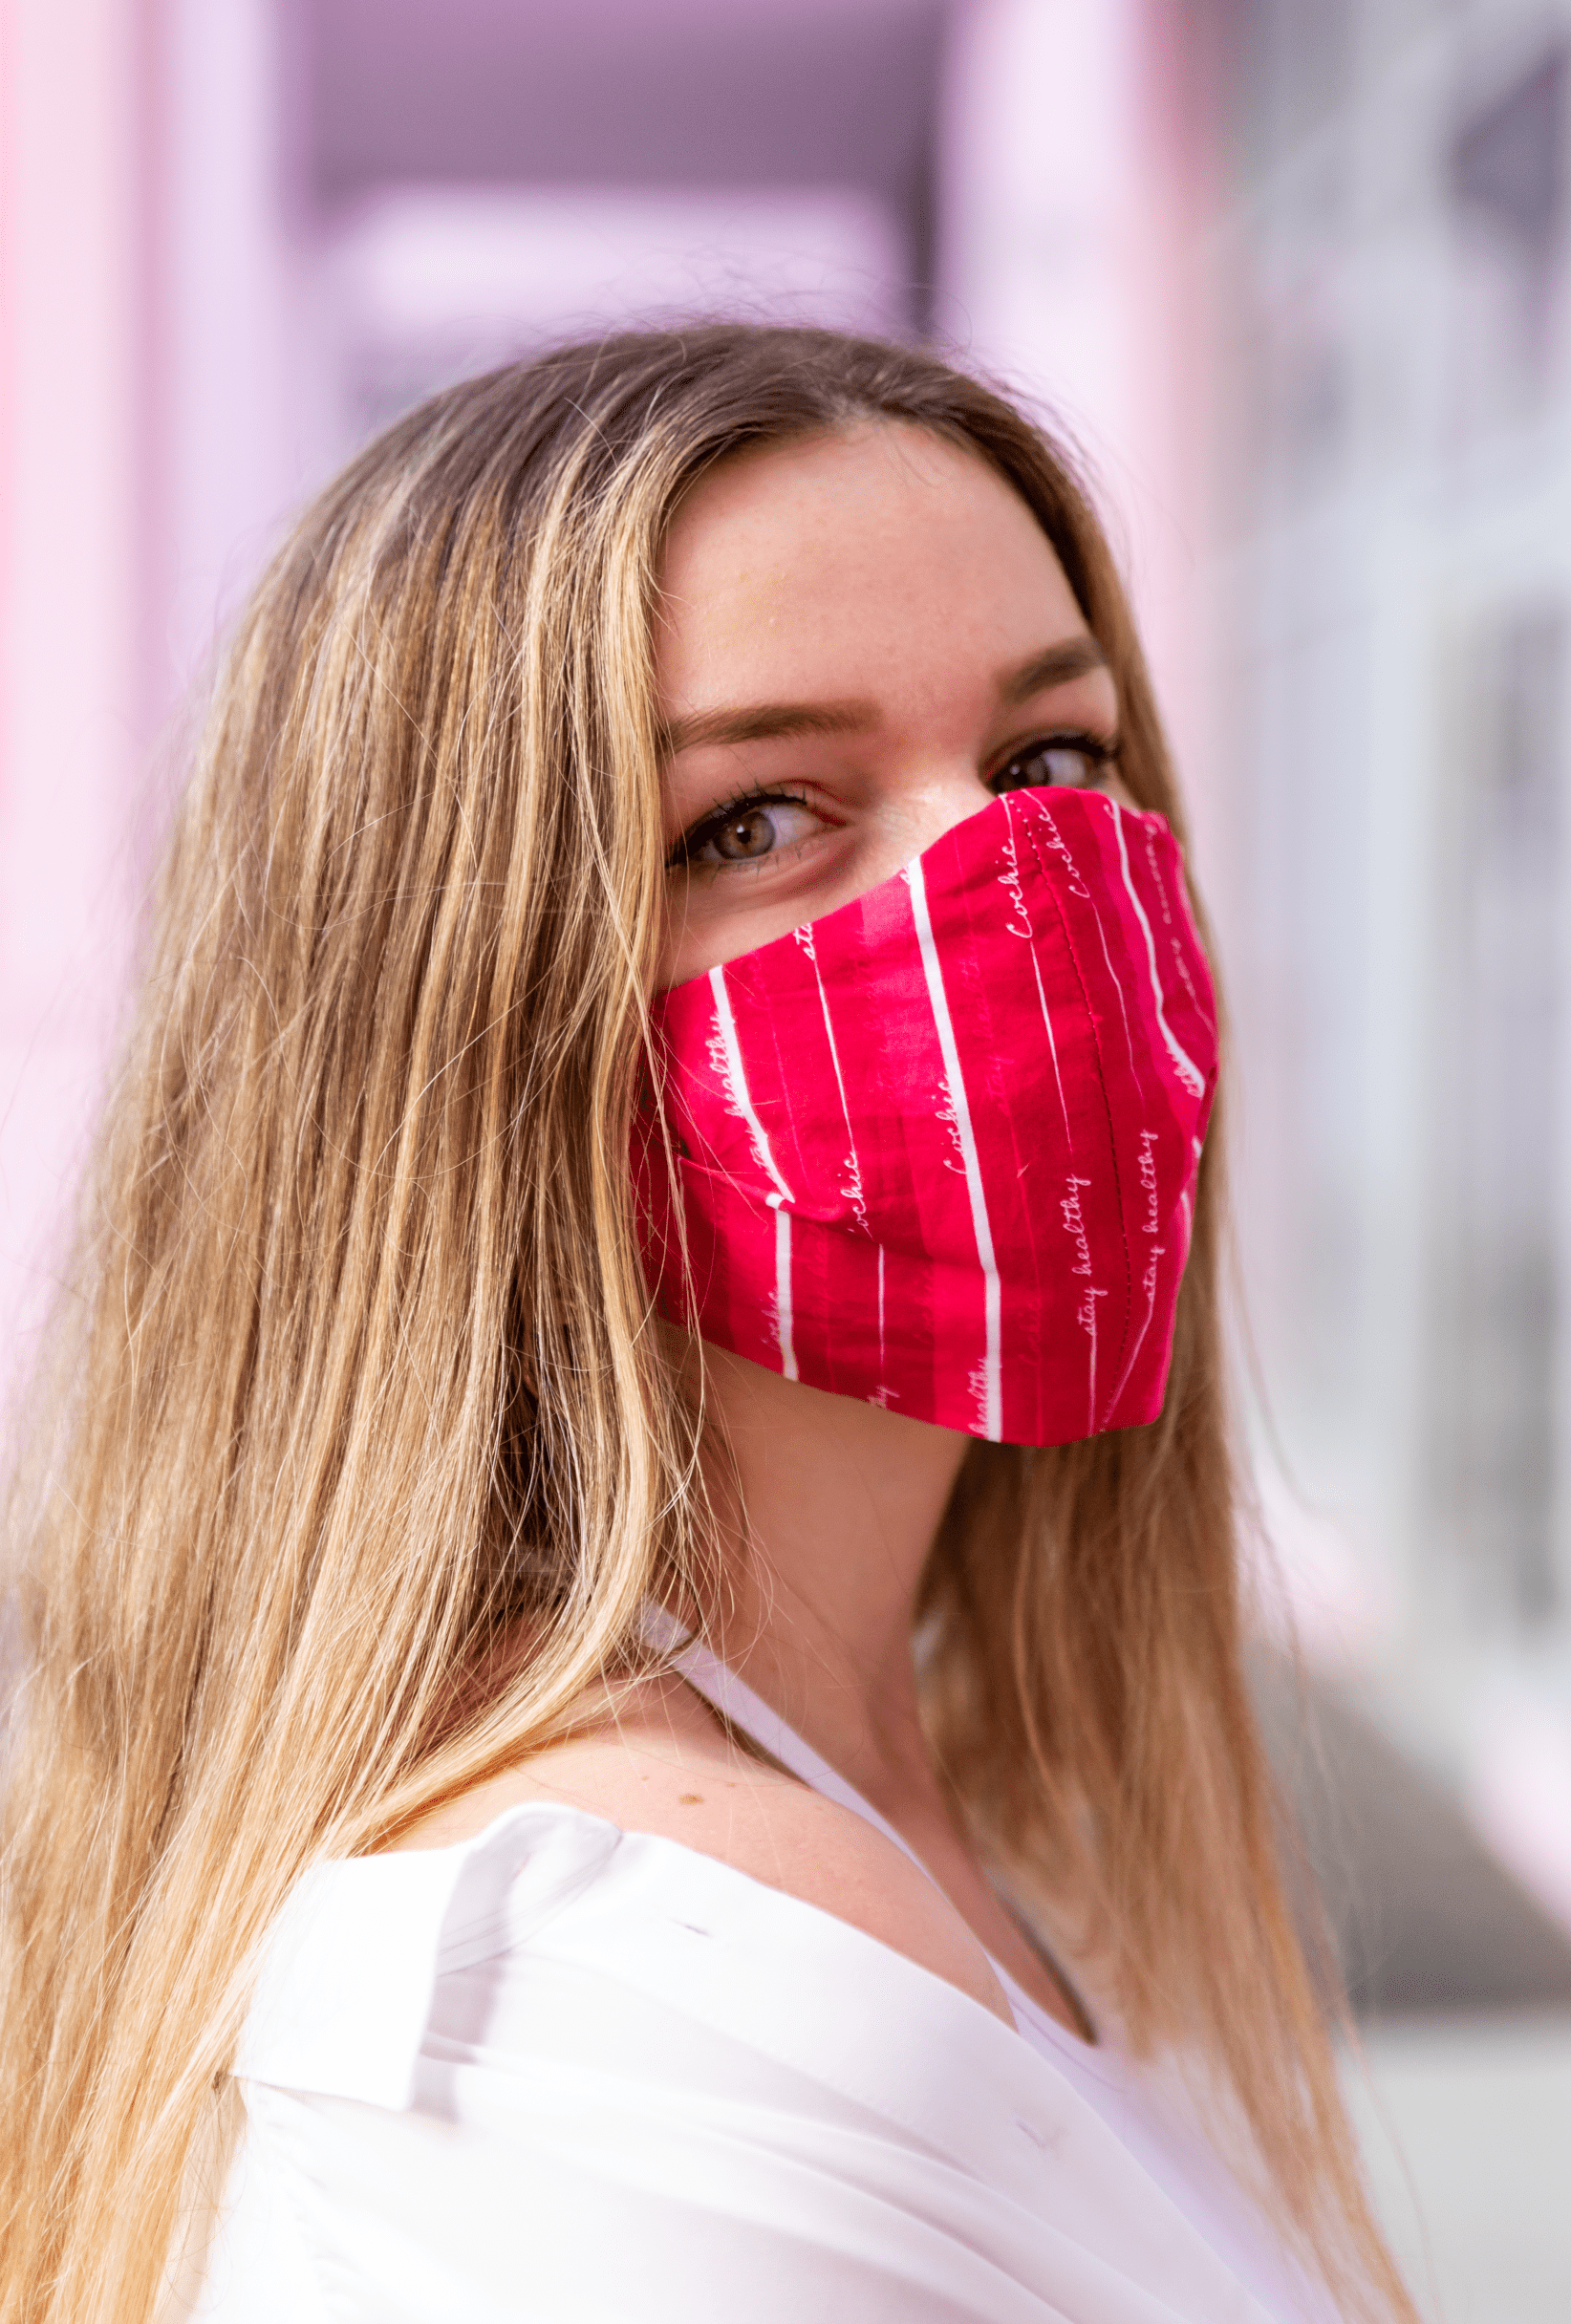 Sophie's Top Picks: “Stay Healthy” 99.9% Antibacterial Mask - Jazzy - Cochic